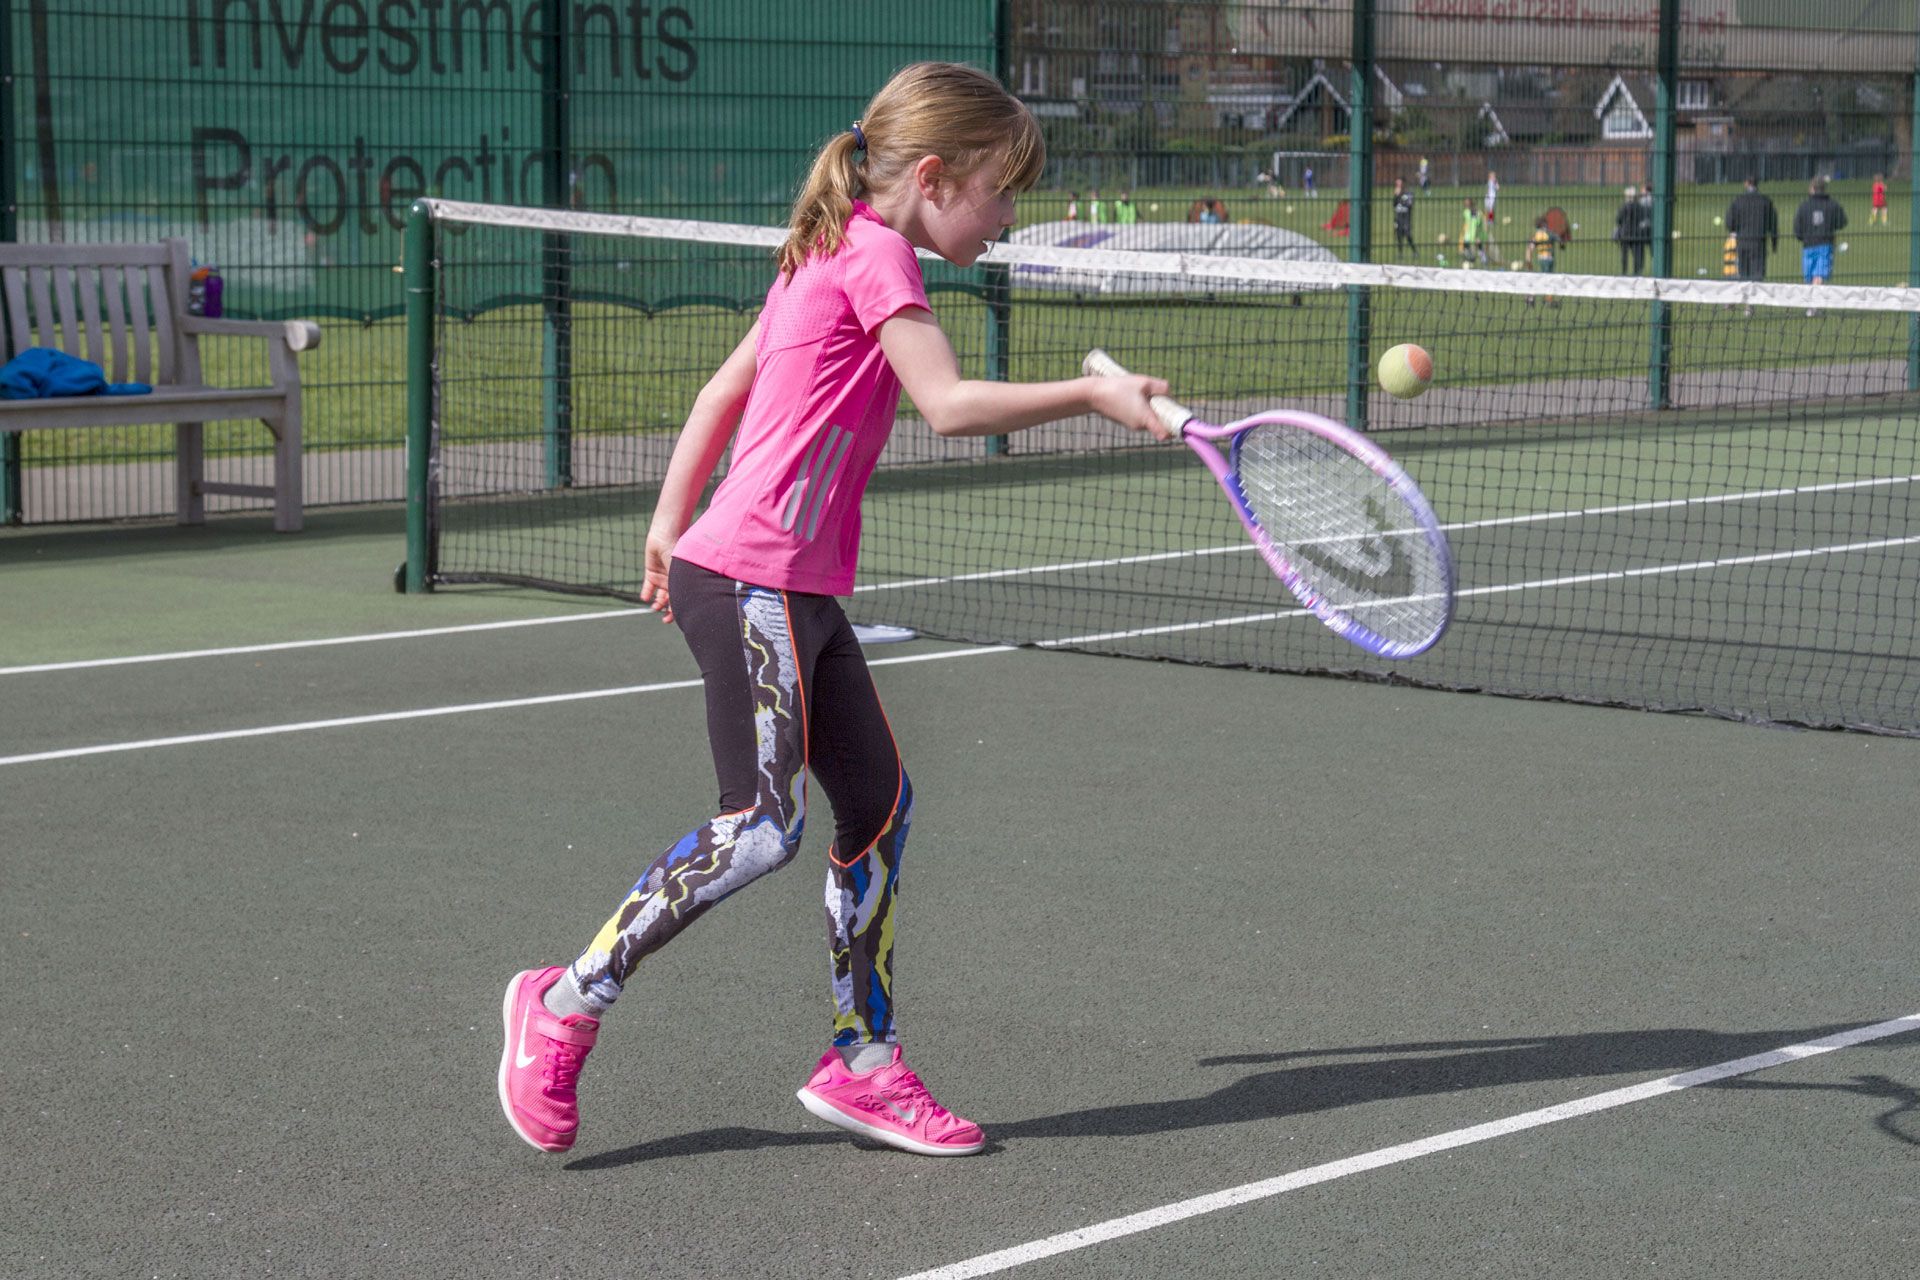 Tennis lessons for kids in SW London